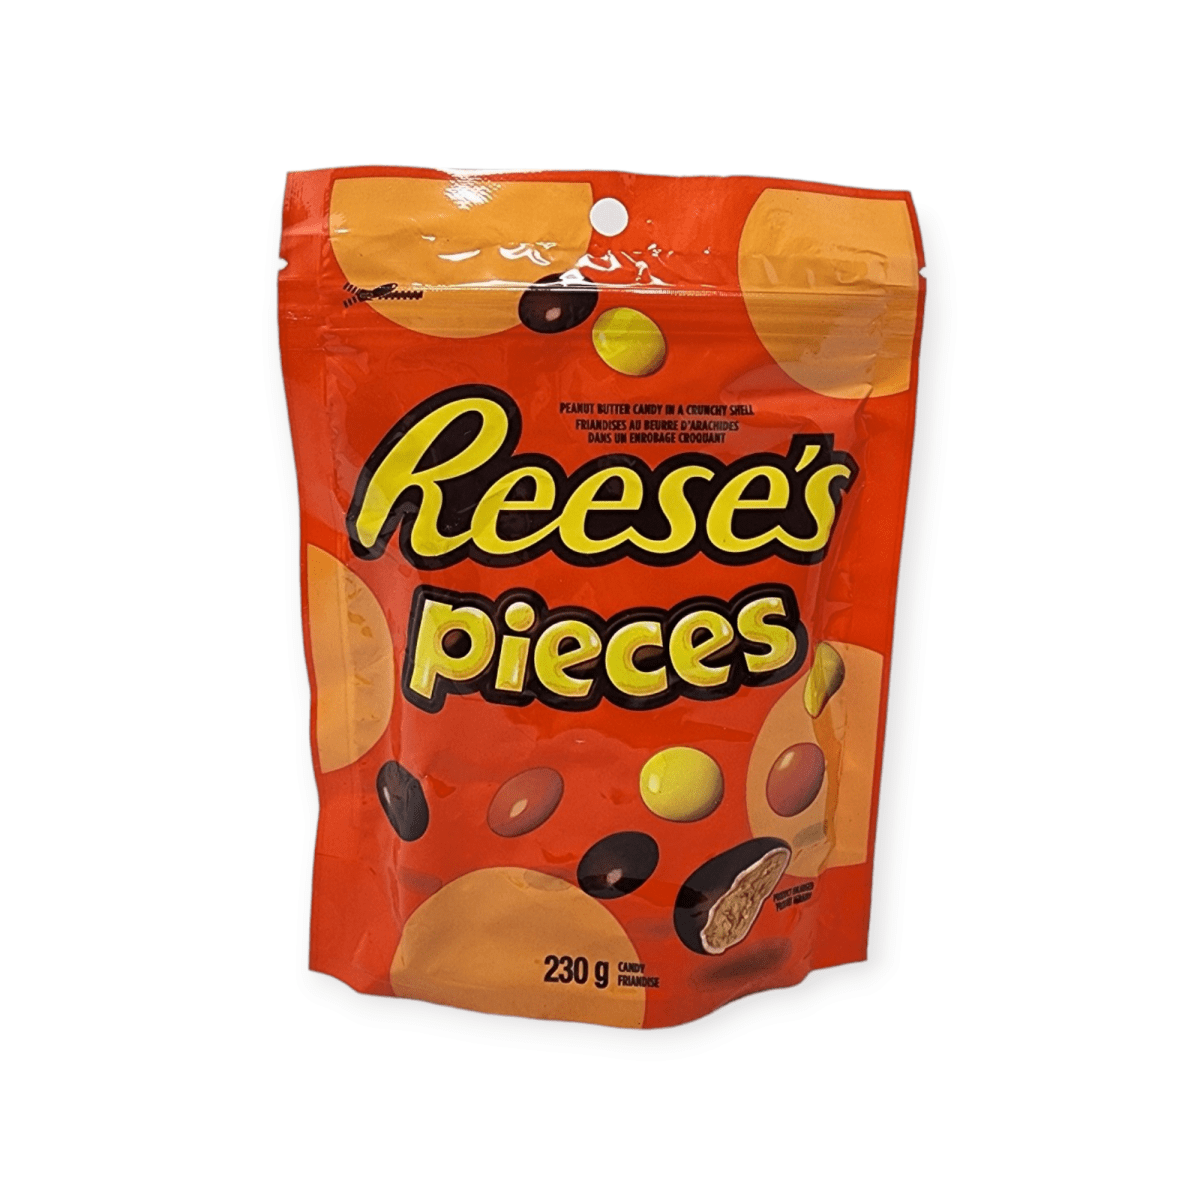 Reese’s Pieces (230g)